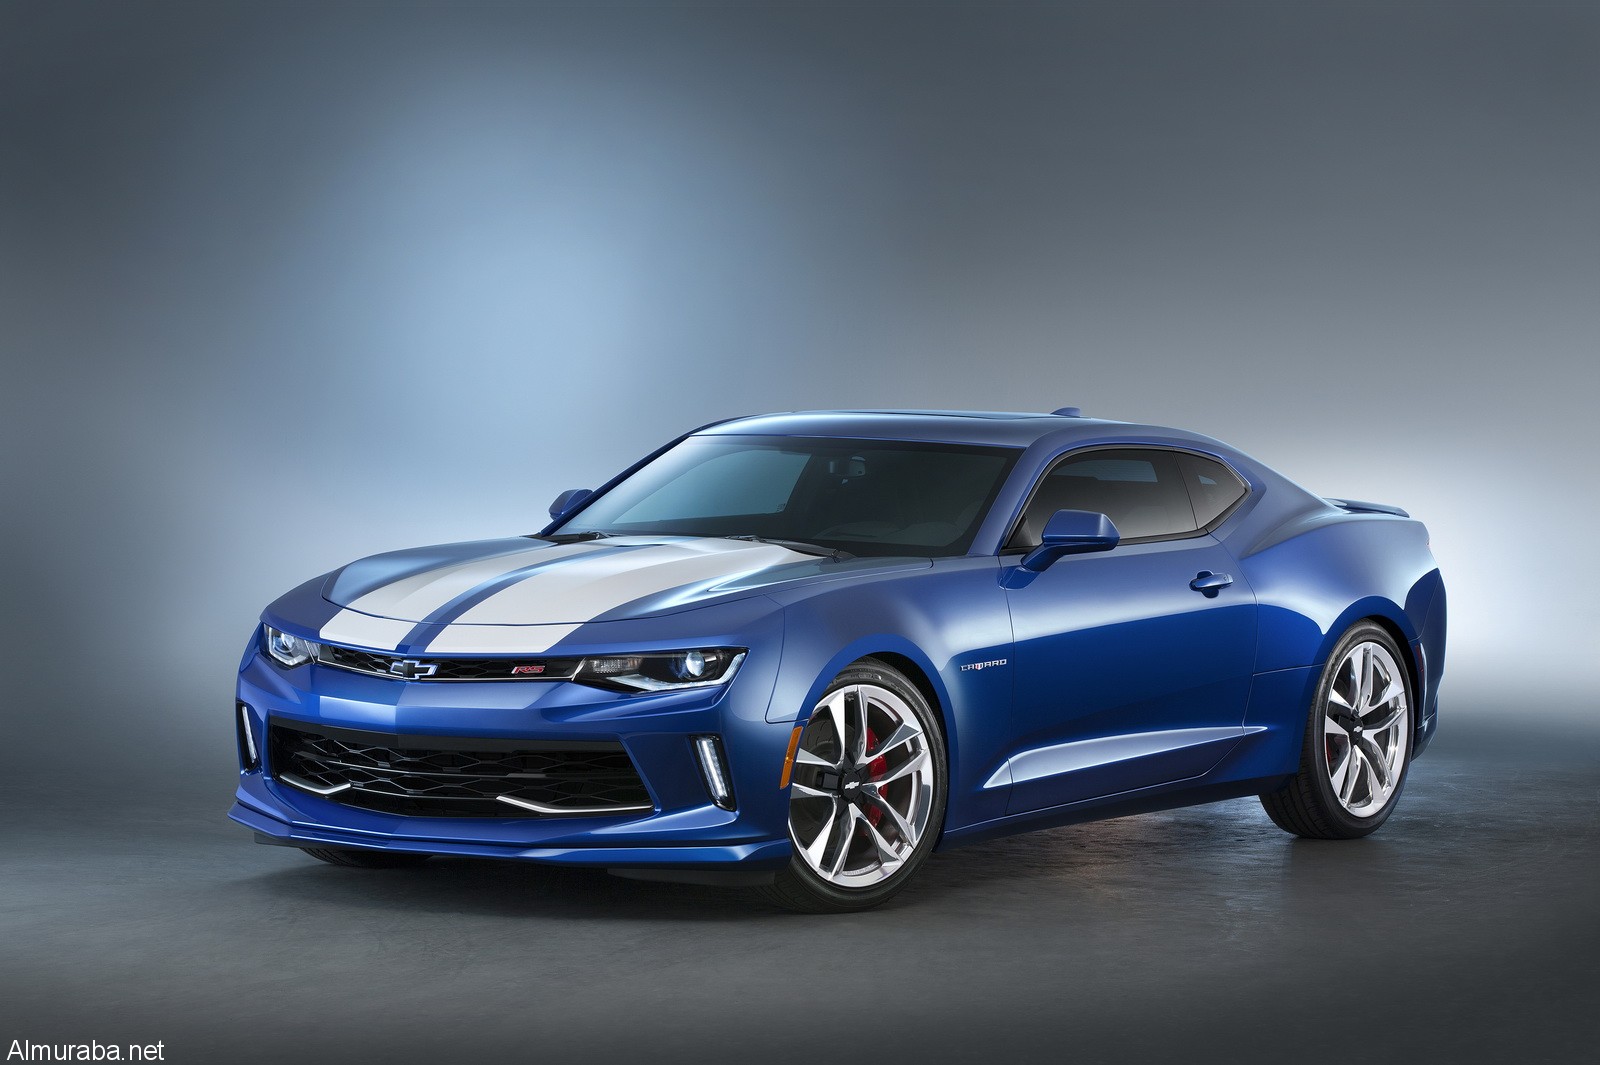 Camaro Hyper concept – Inspired by Camaro’s heritage, this Hyper Blue Camaro LT coupe with the available 3.6L V-6 engine features white rally stripes, heritage-style fender badges and polished 20-inch forged aluminum wheels.